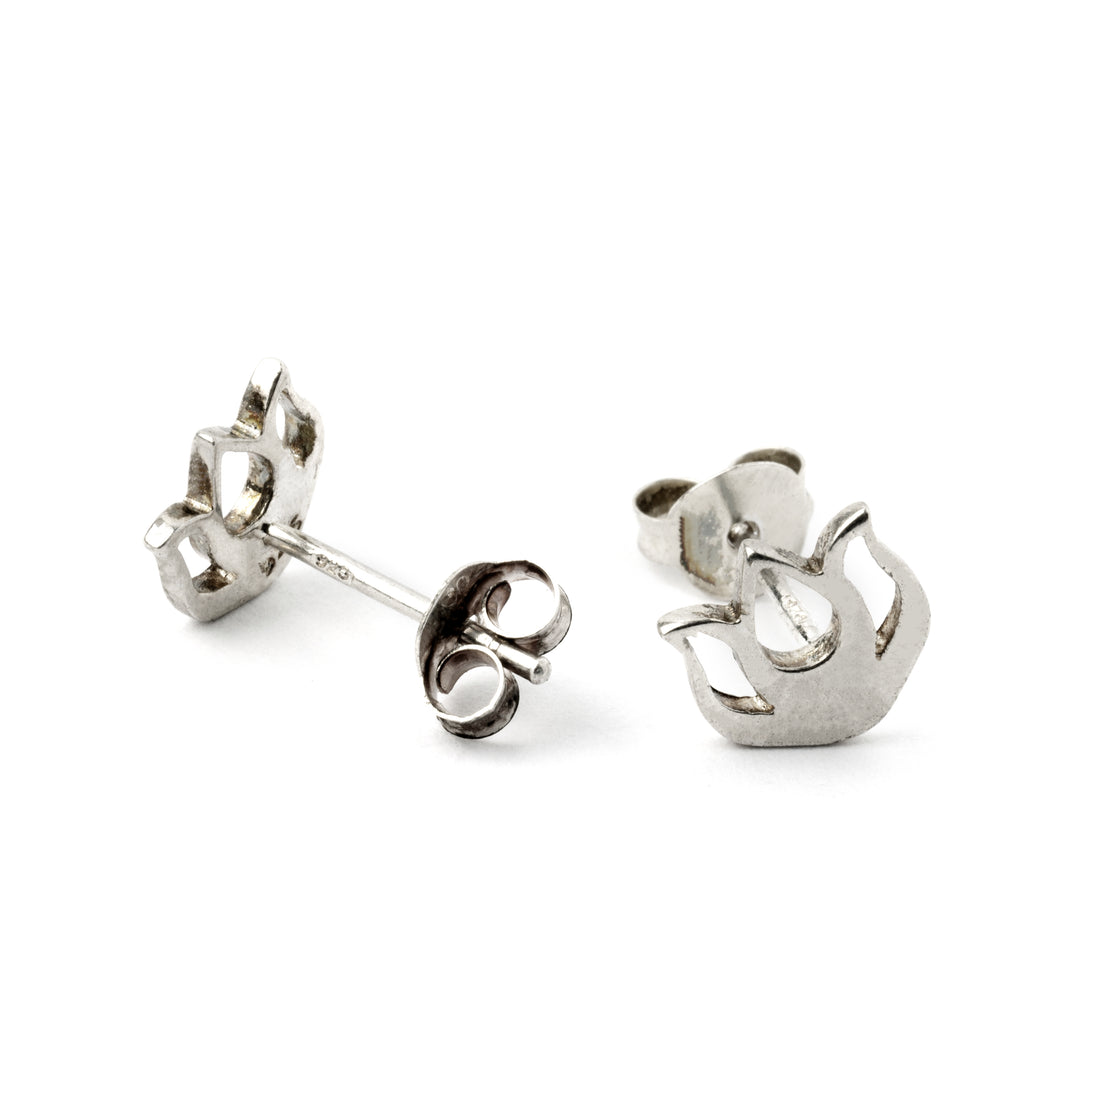 Lotus Blossom Ear Studs front and back view